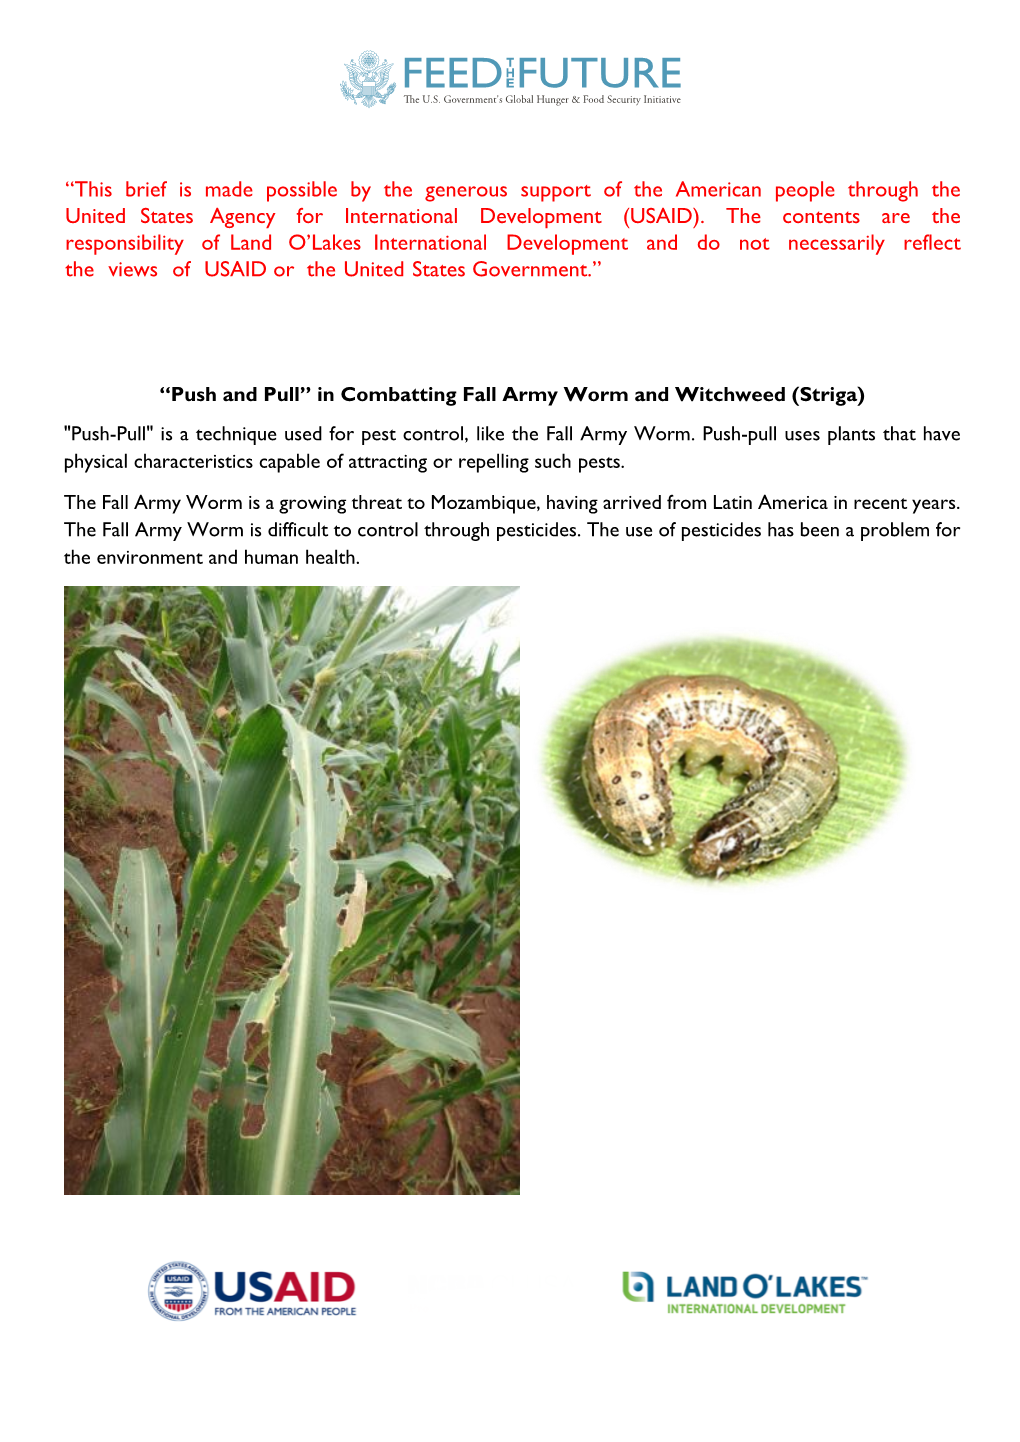 FAW and Striga Prevention Using the Push-Pull Method